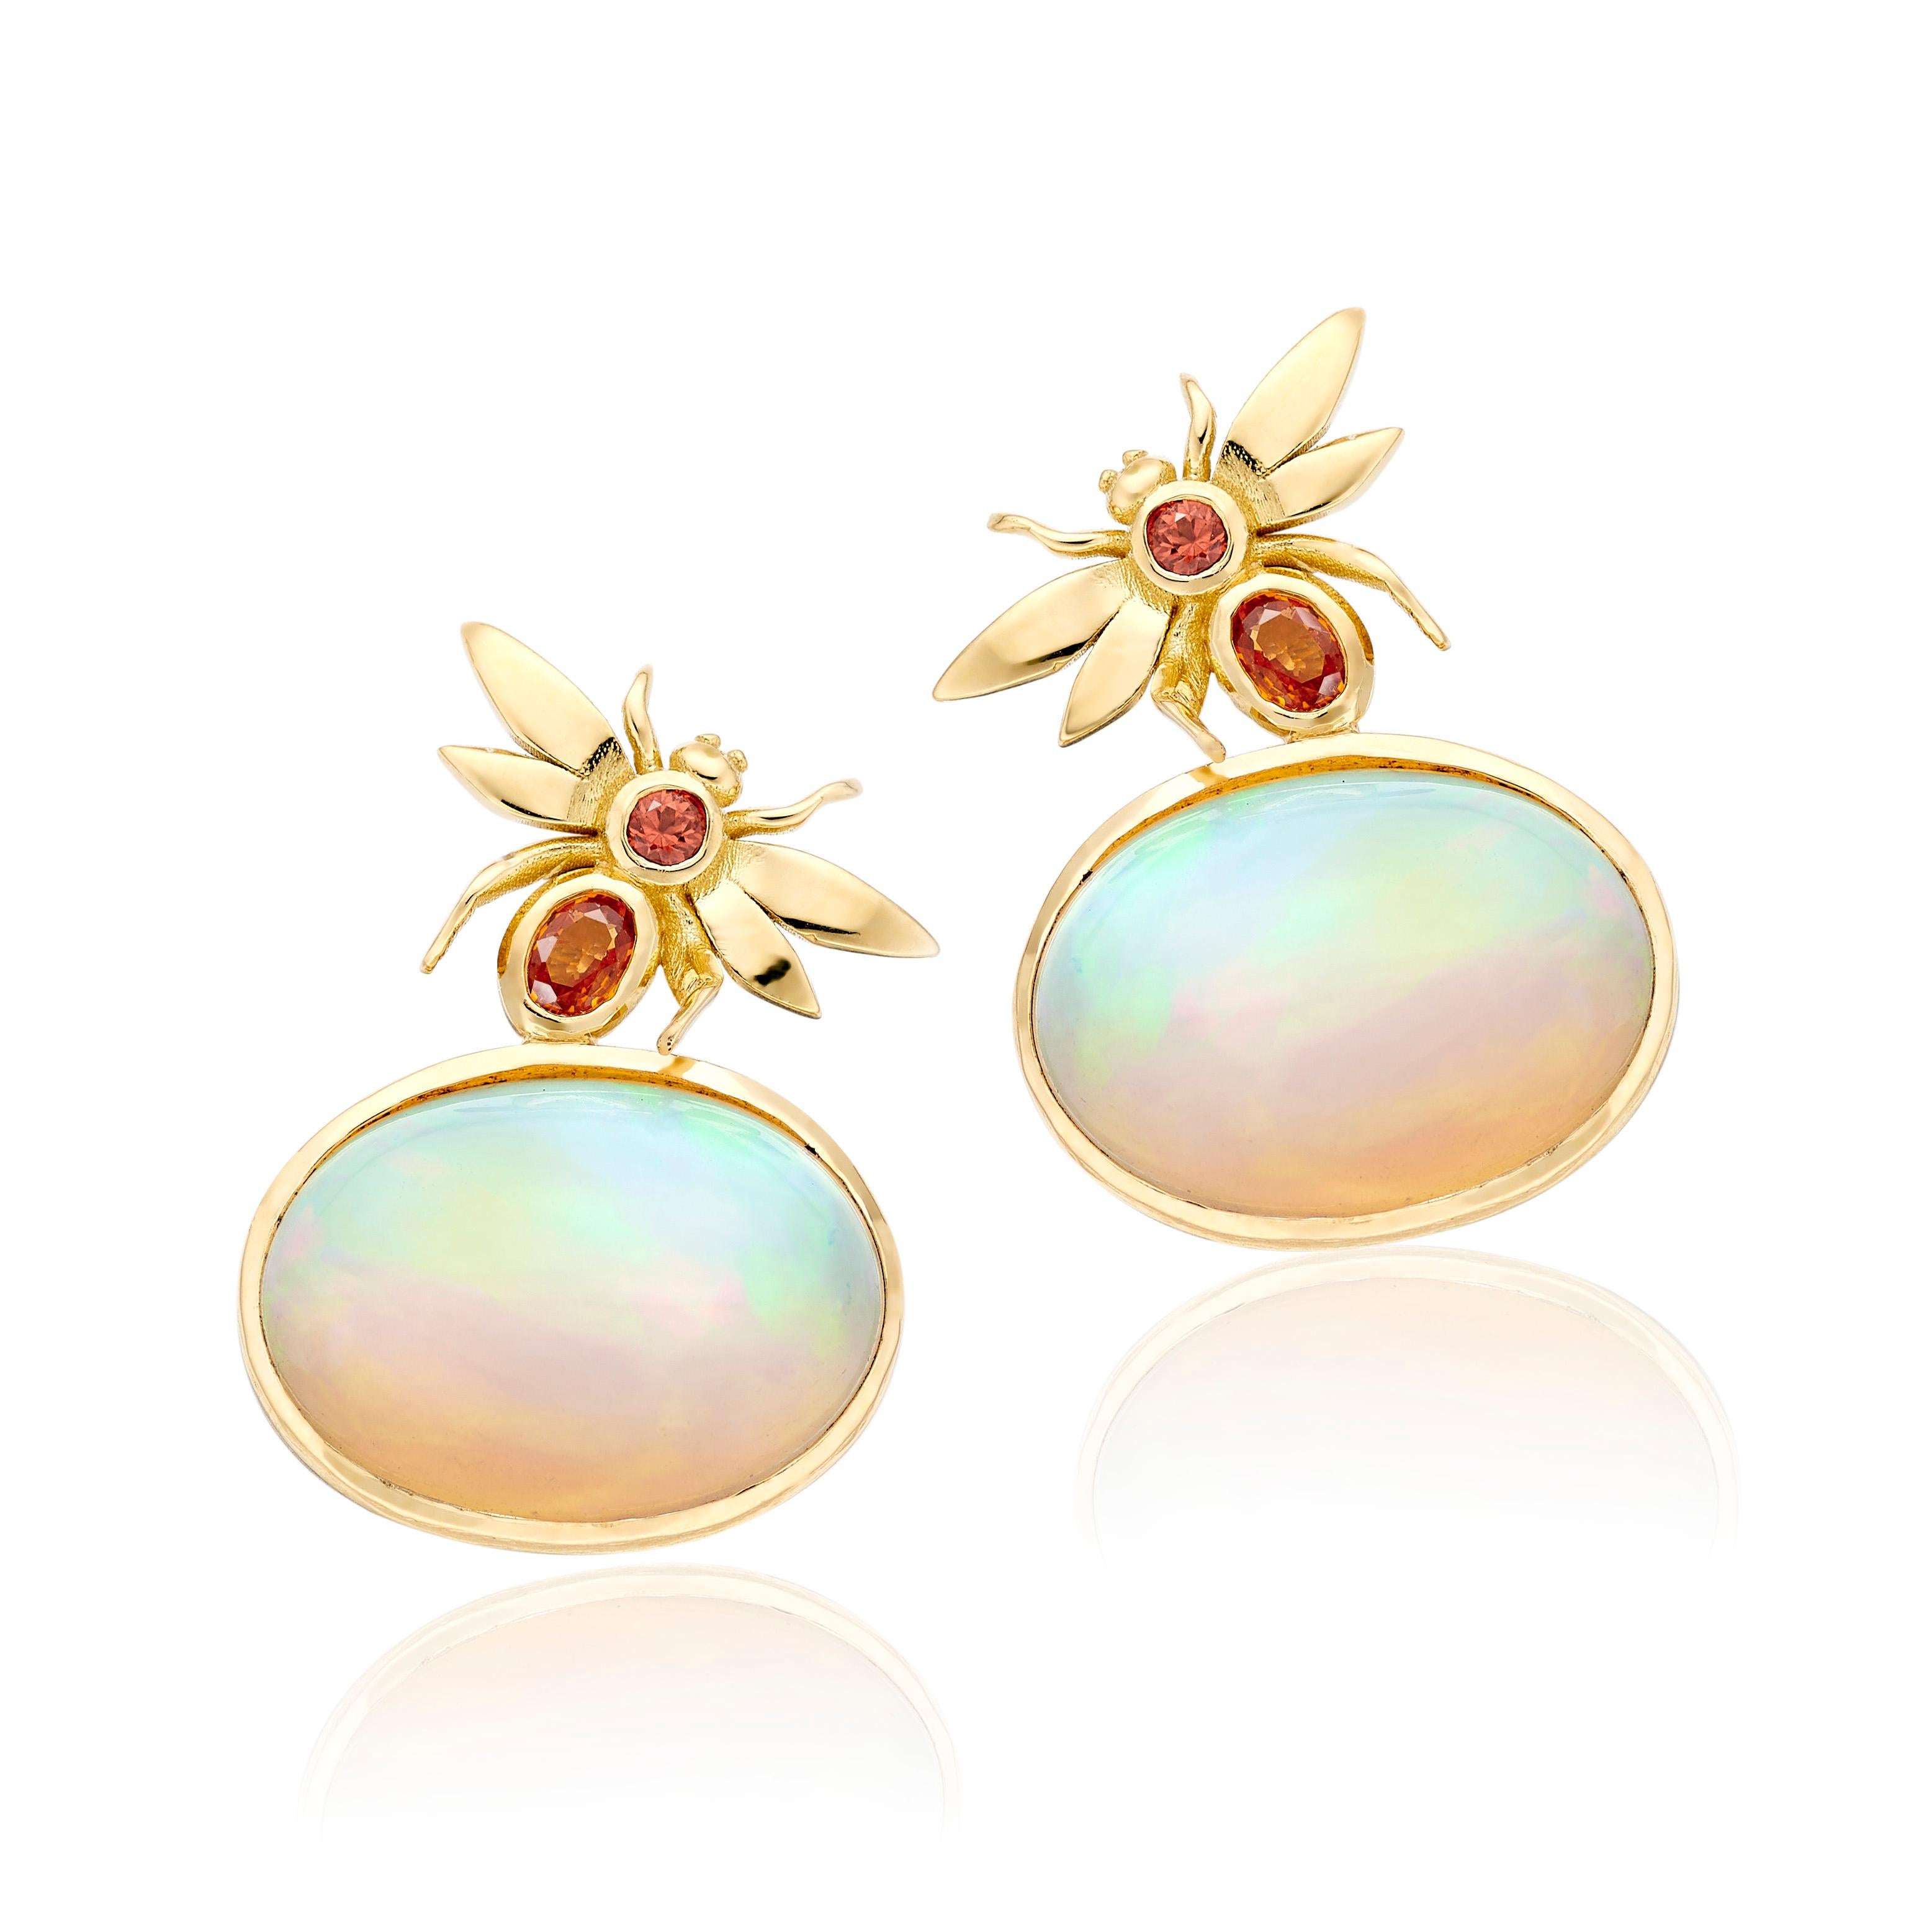 Cabochon Lilly Hastedt Mandarin Garnet and Opal Earrings For Sale